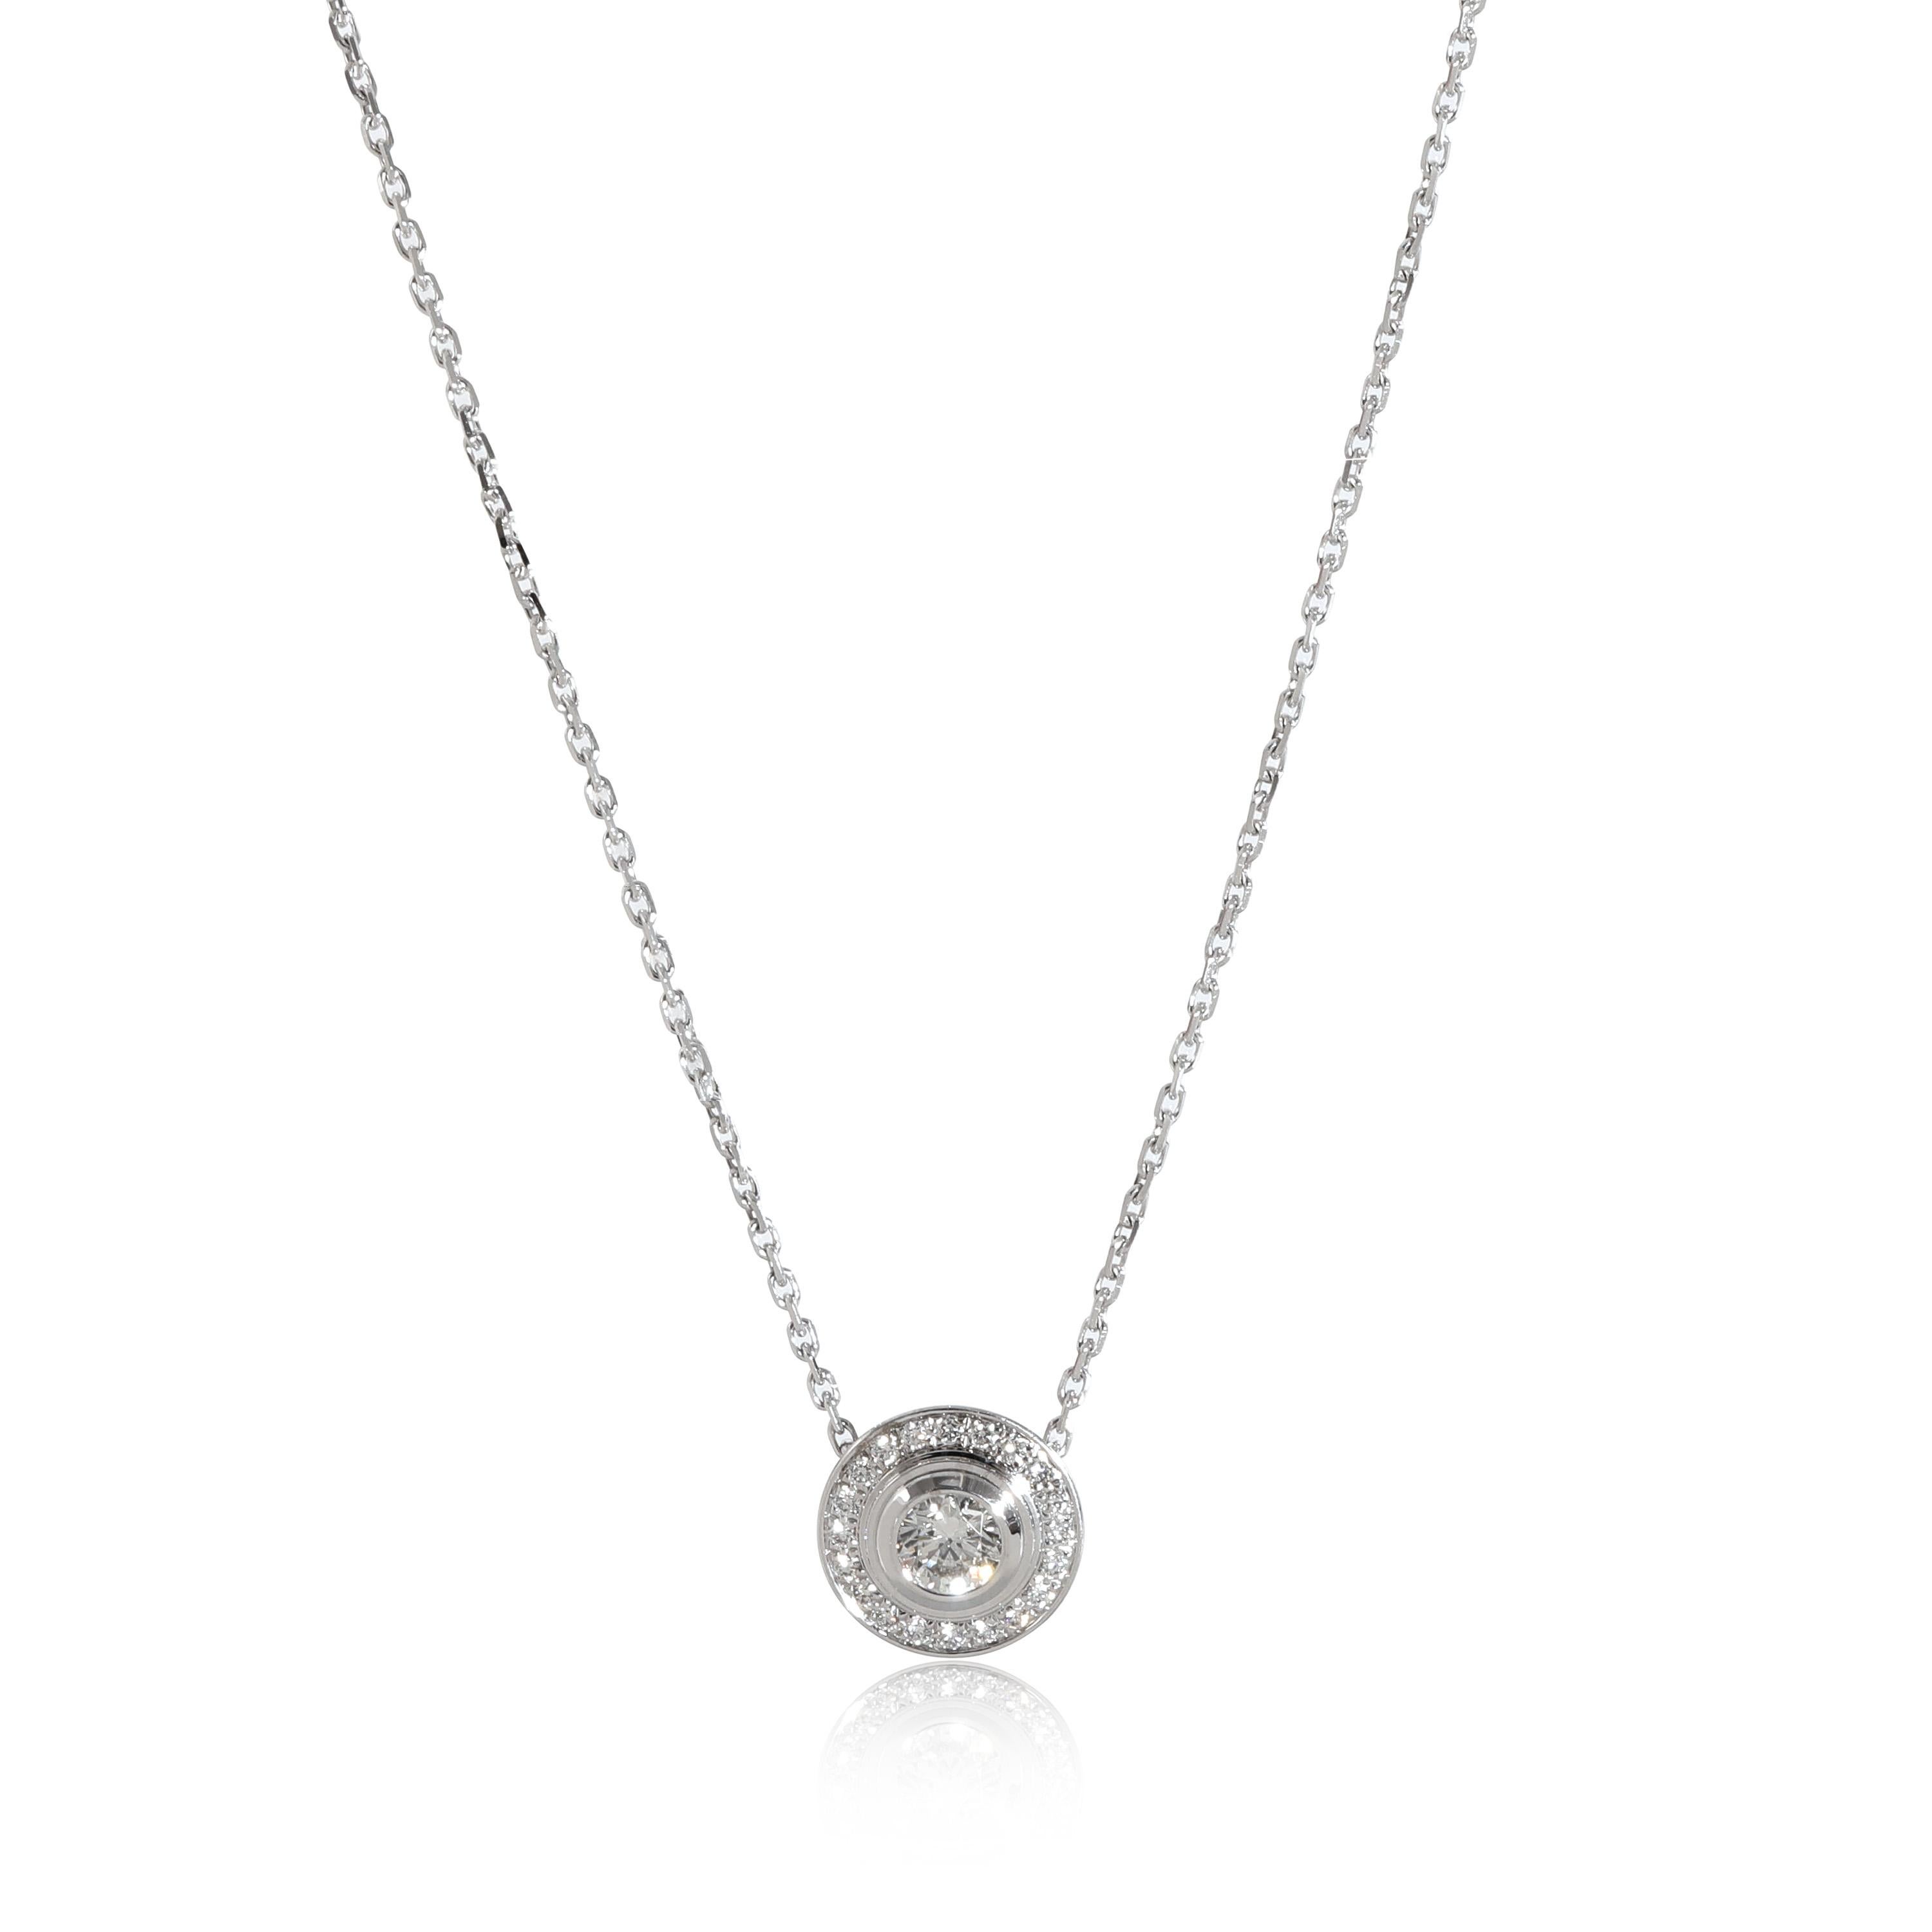 Cartier D'Amour Necklace in 18k White Gold 0.30 CTW

PRIMARY DETAILS
SKU: 131619
Listing Title: Cartier D'Amour Necklace in 18k White Gold 0.30 CTW
Condition Description: Retails for 3900 USD. In excellent condition and recently polished. Cartier